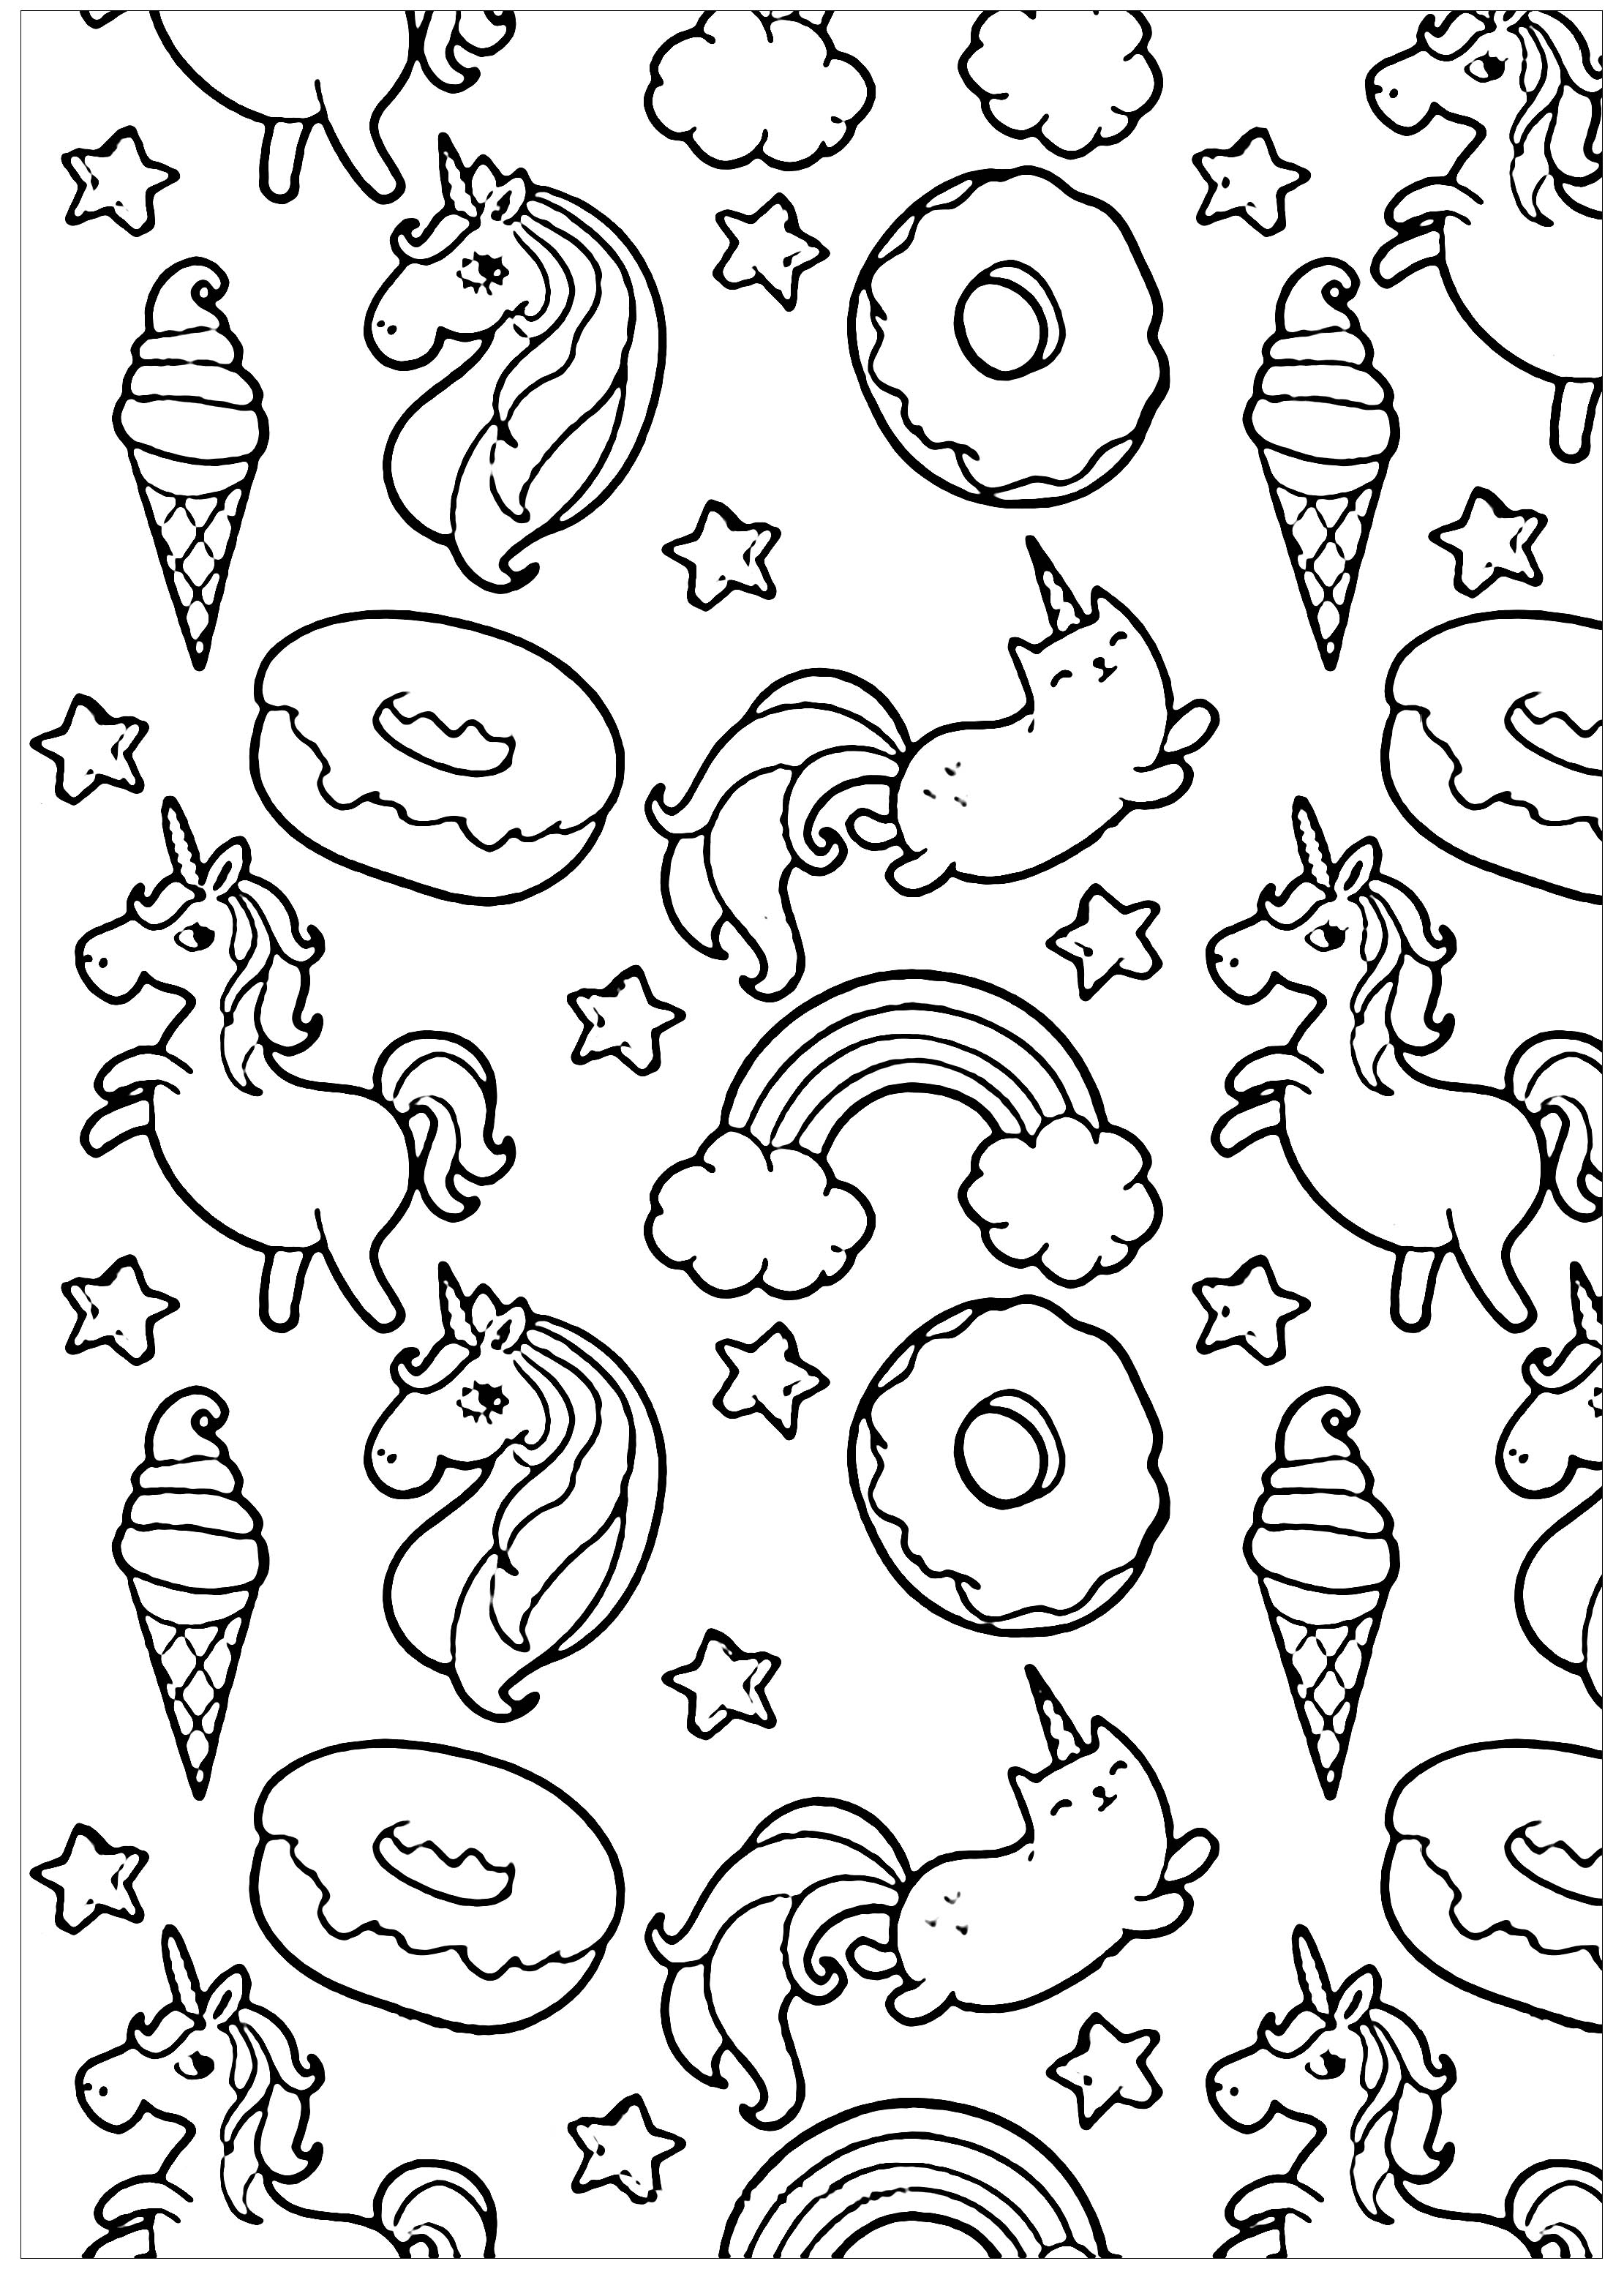 66 Unicorn Cat Coloring Pages For Free